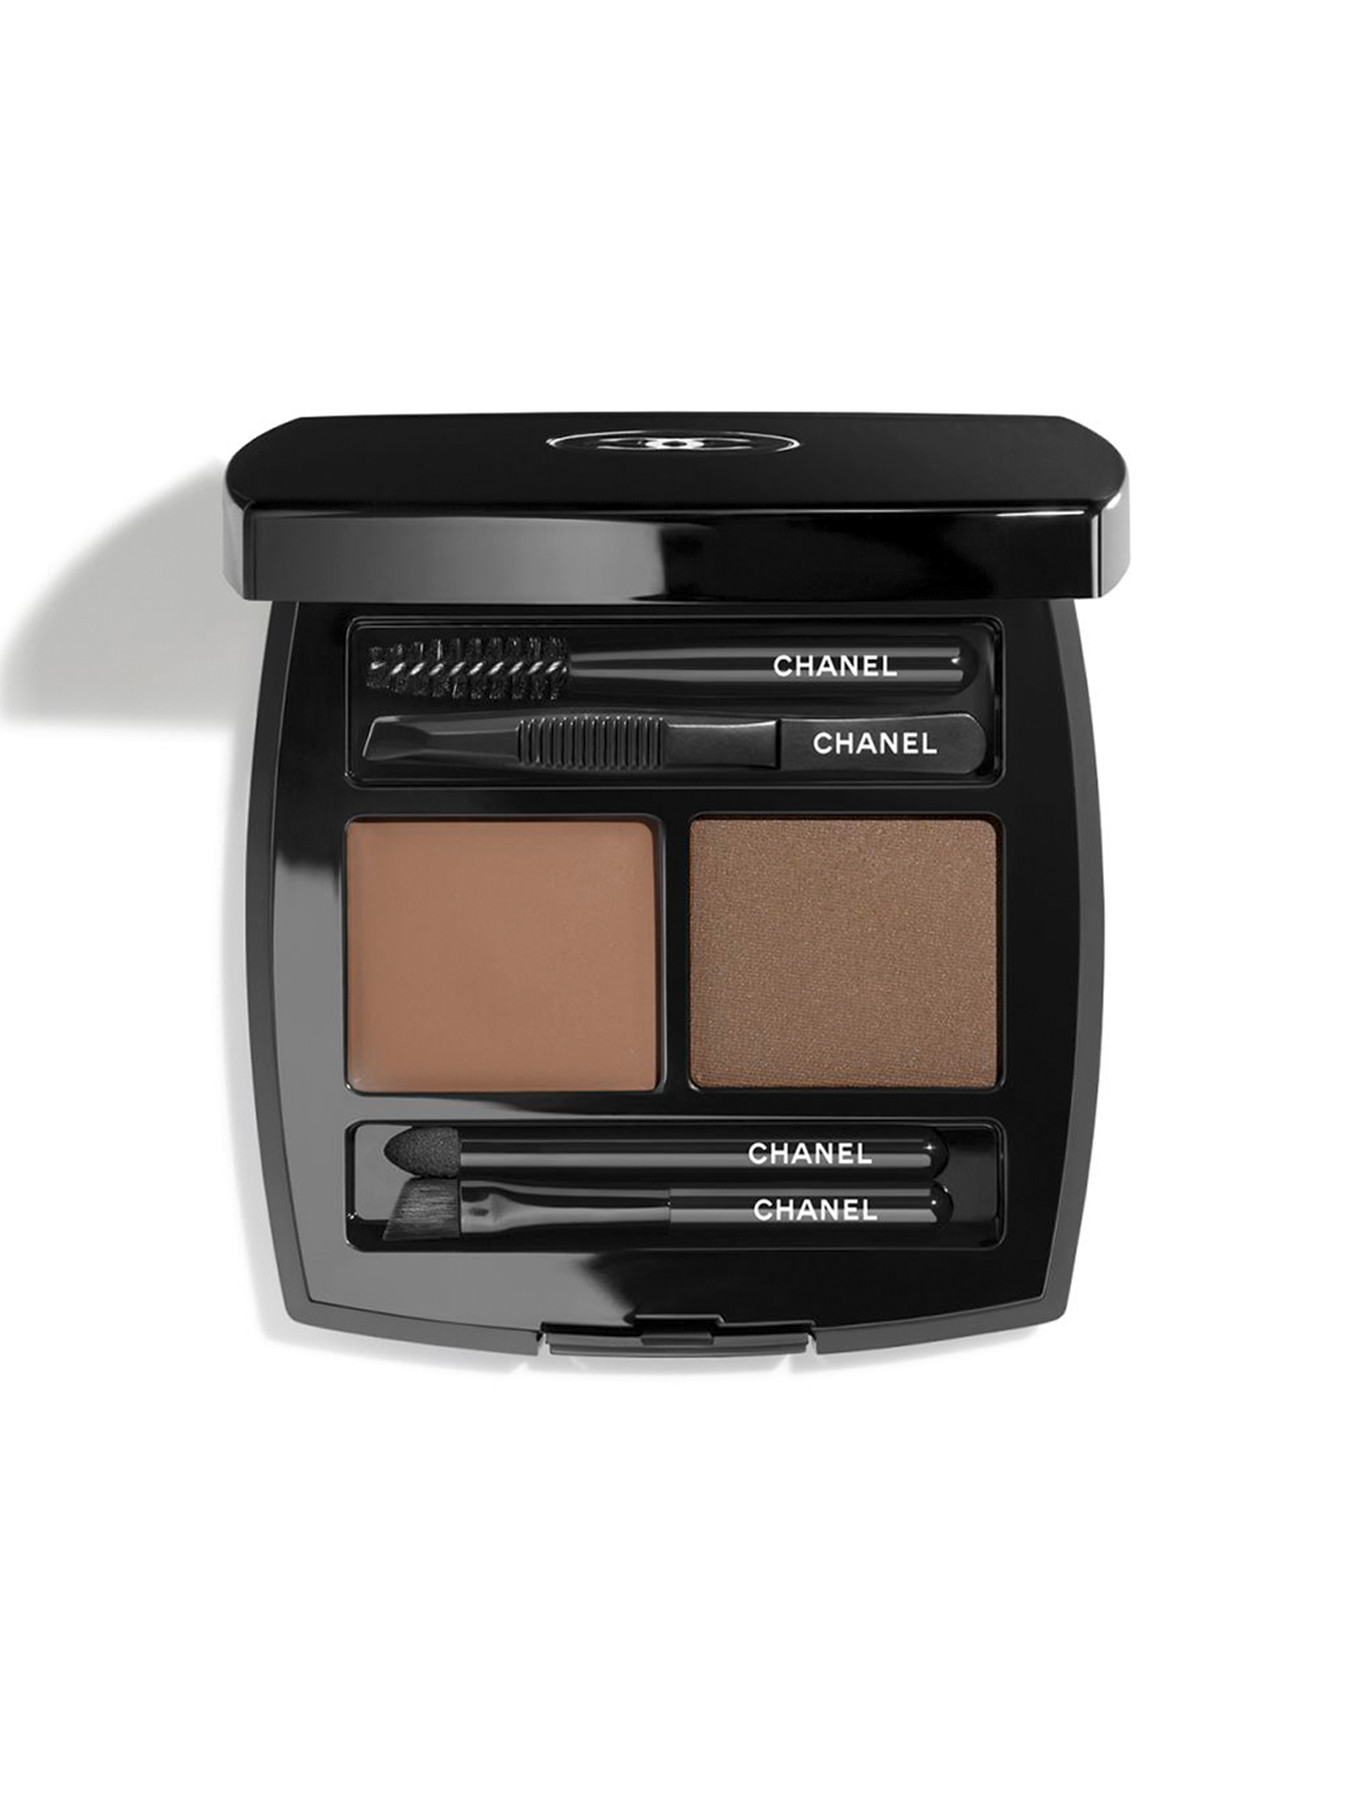 Chanel La Palette Sourcils Brow Wax And Brow Powder Duo Light